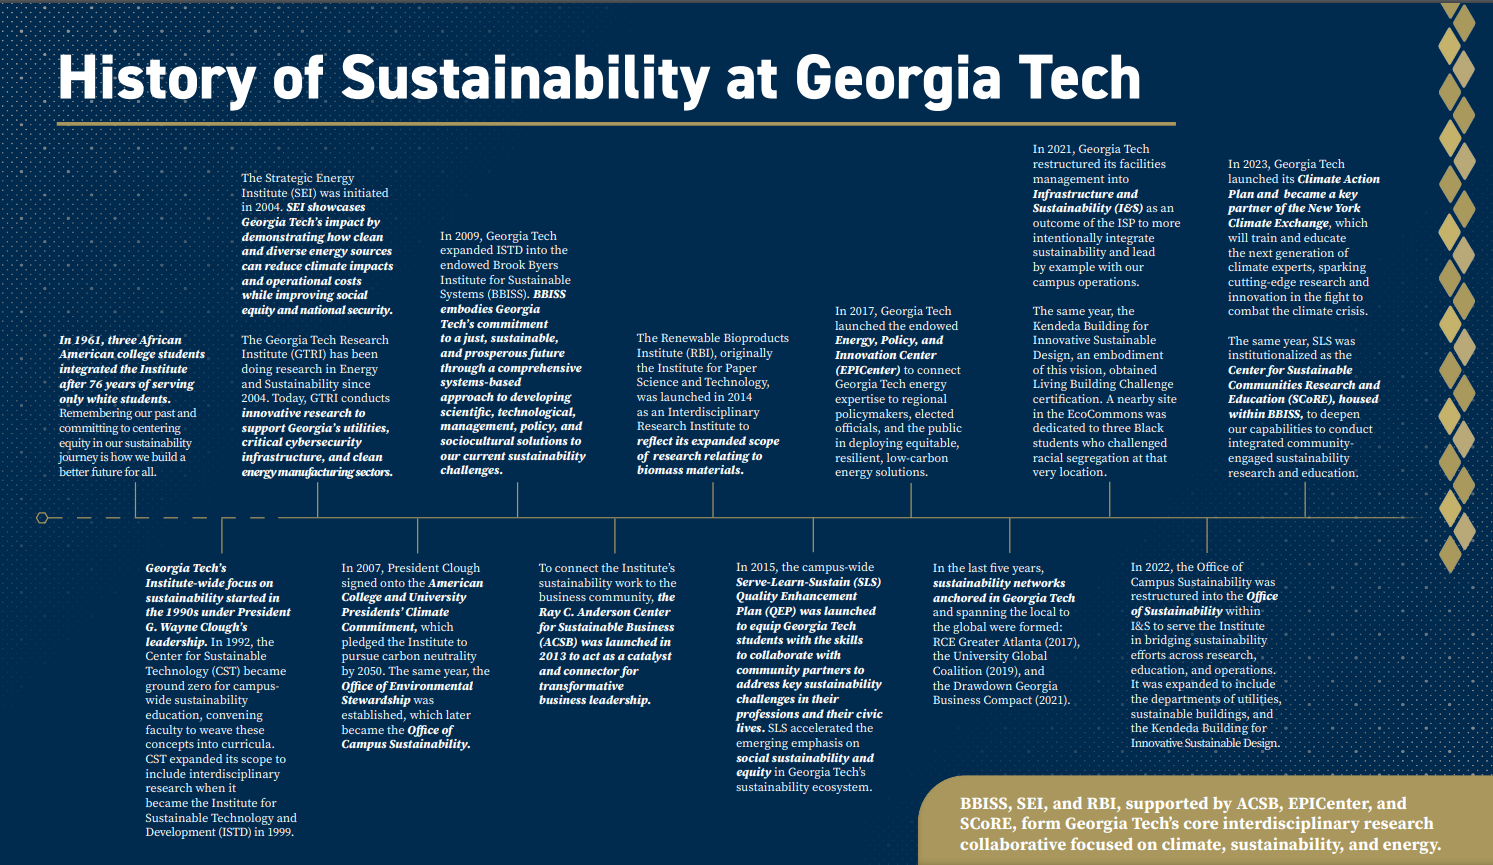 Timeline showing the history of sustainability at Georgia Tech